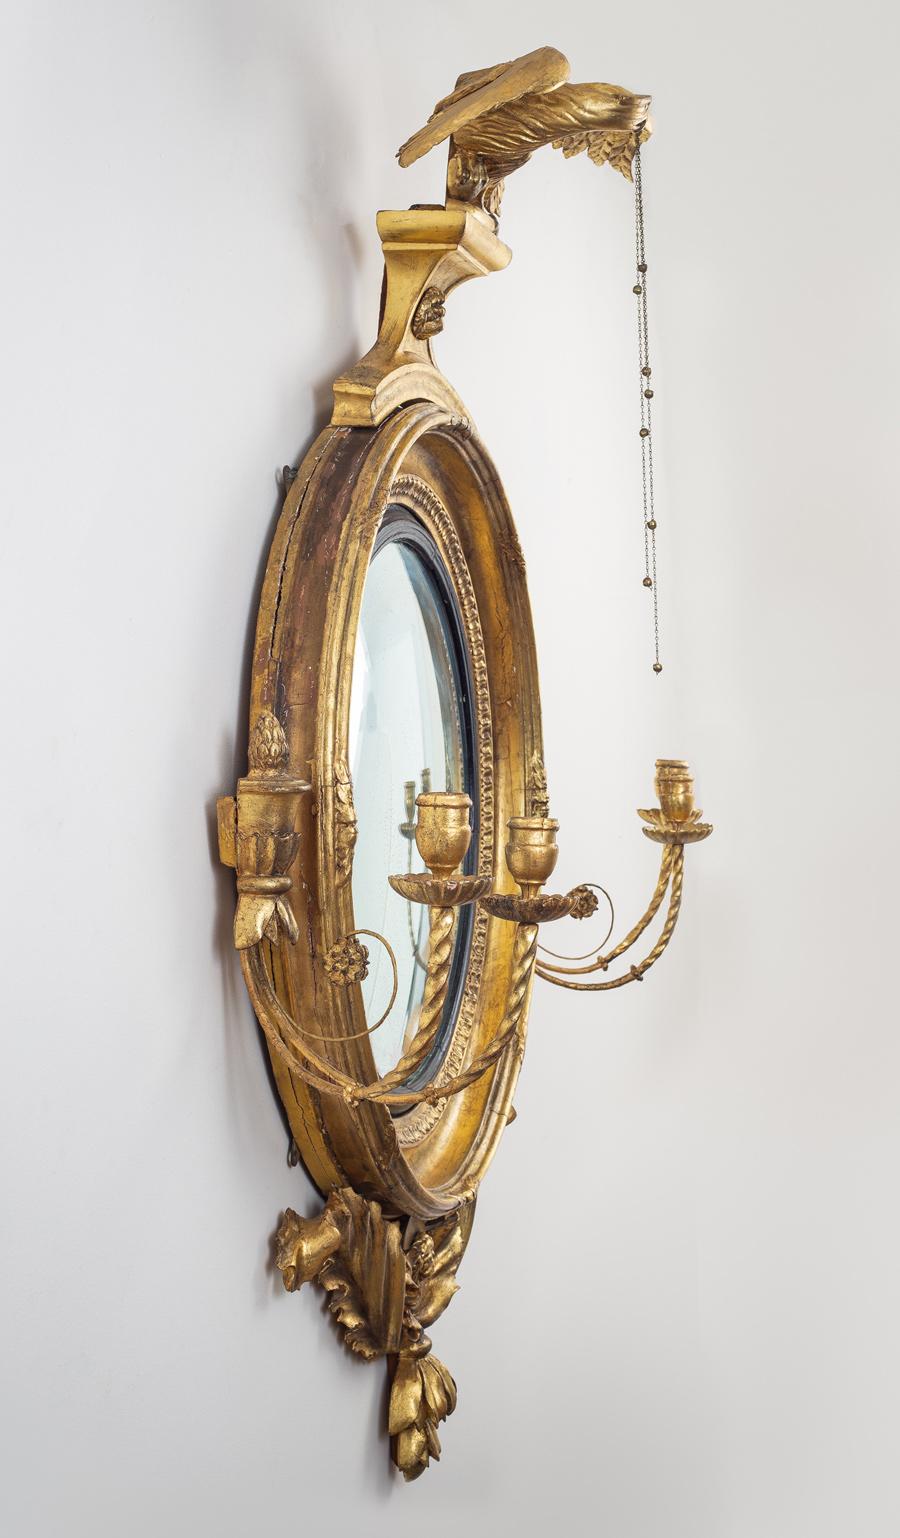 Large monumental classical gilded convex girandole mirror with strikingly well-carved dynamic eagle holding three chains, double candle arms that emanate from a shaped vase flank the mirror frame, the undermount has deeply carved acanthus leaves and